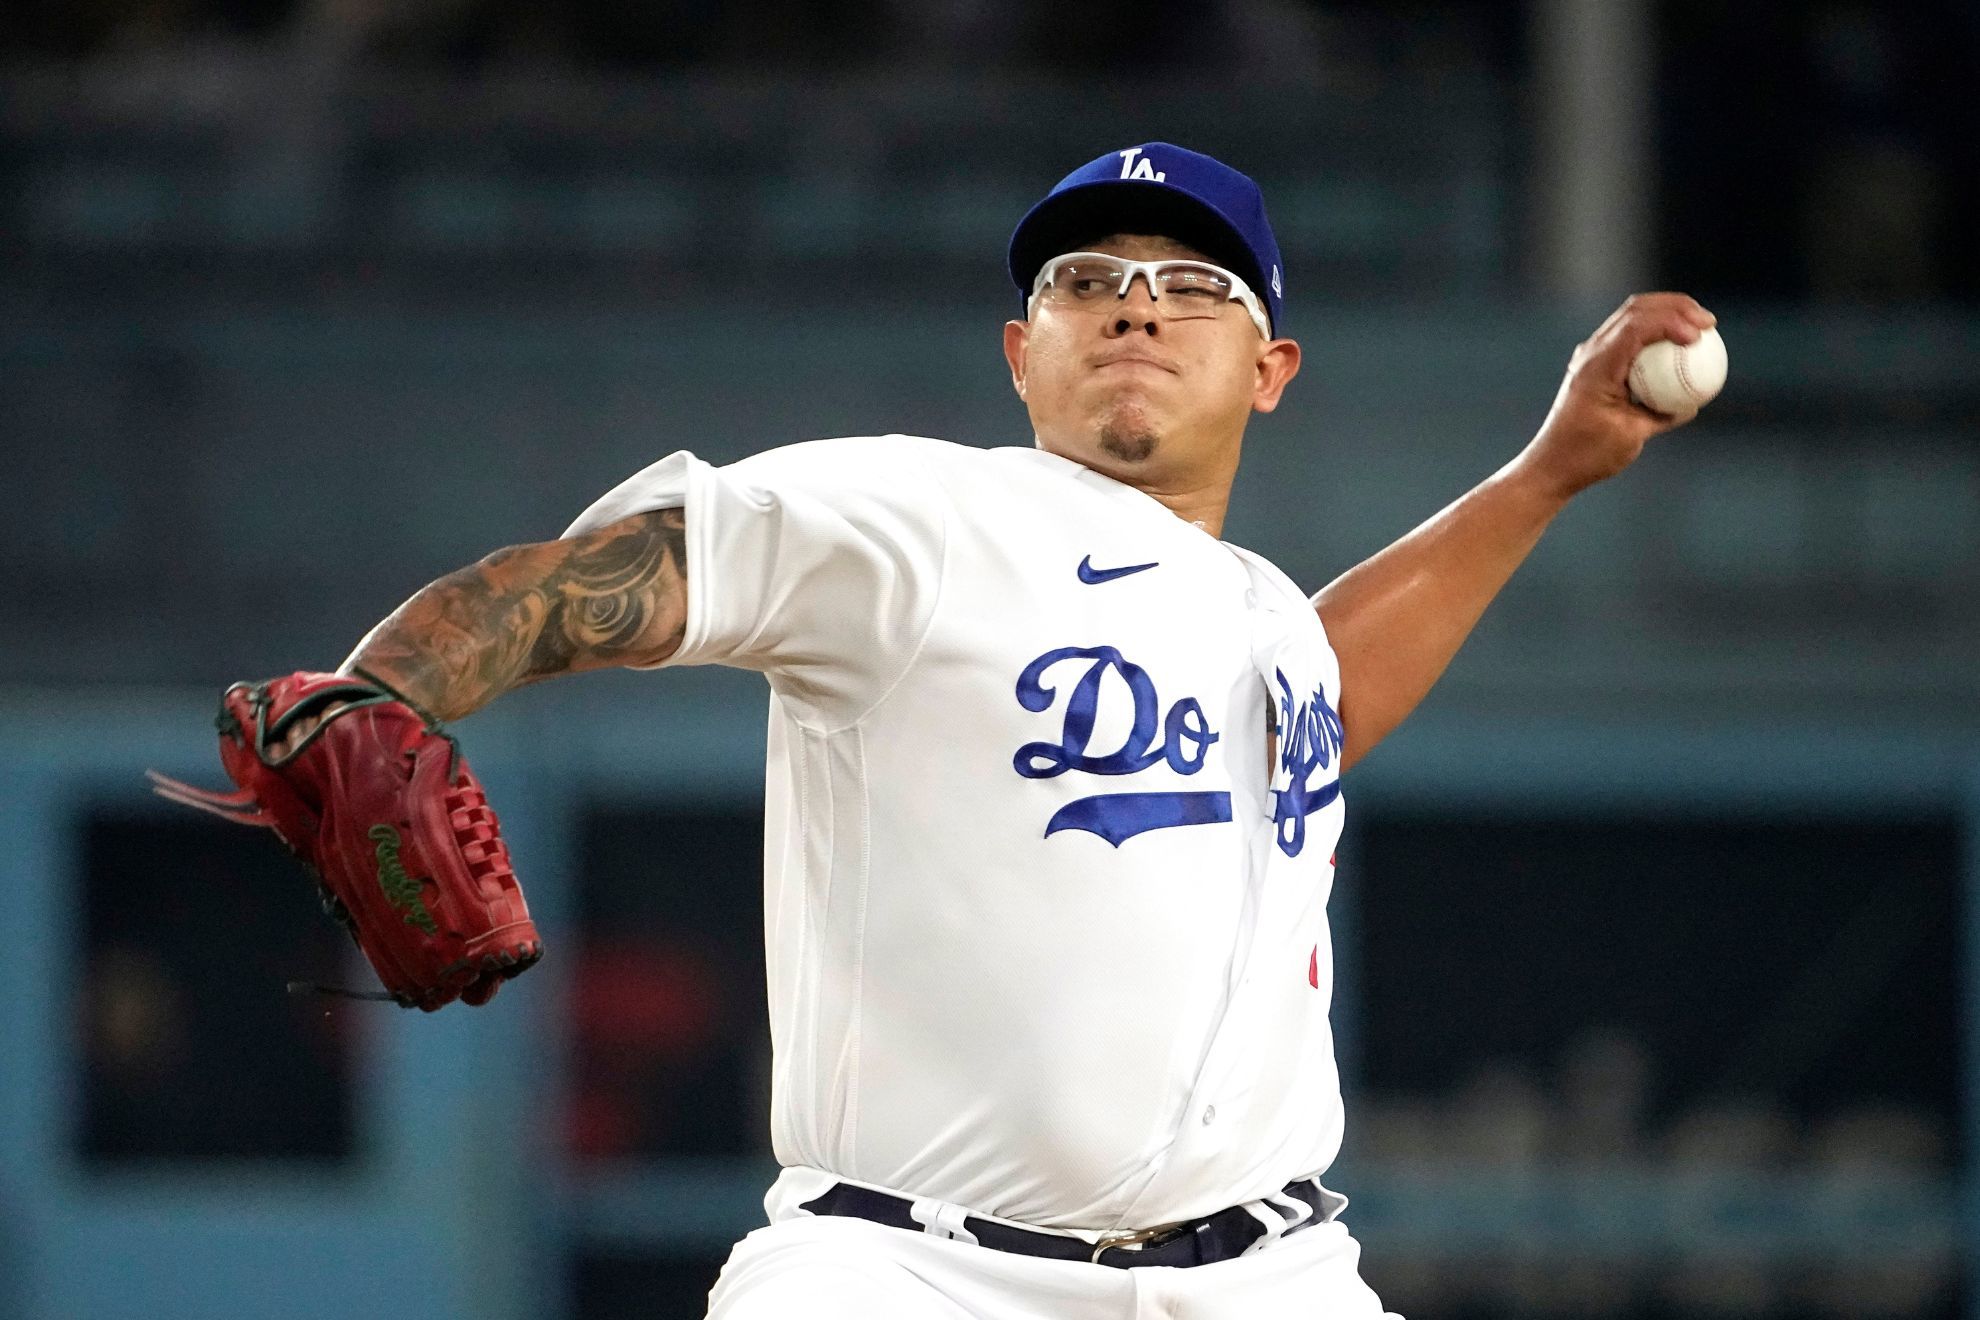 What will happen to Julio Urias after his arrest for domestic violence?